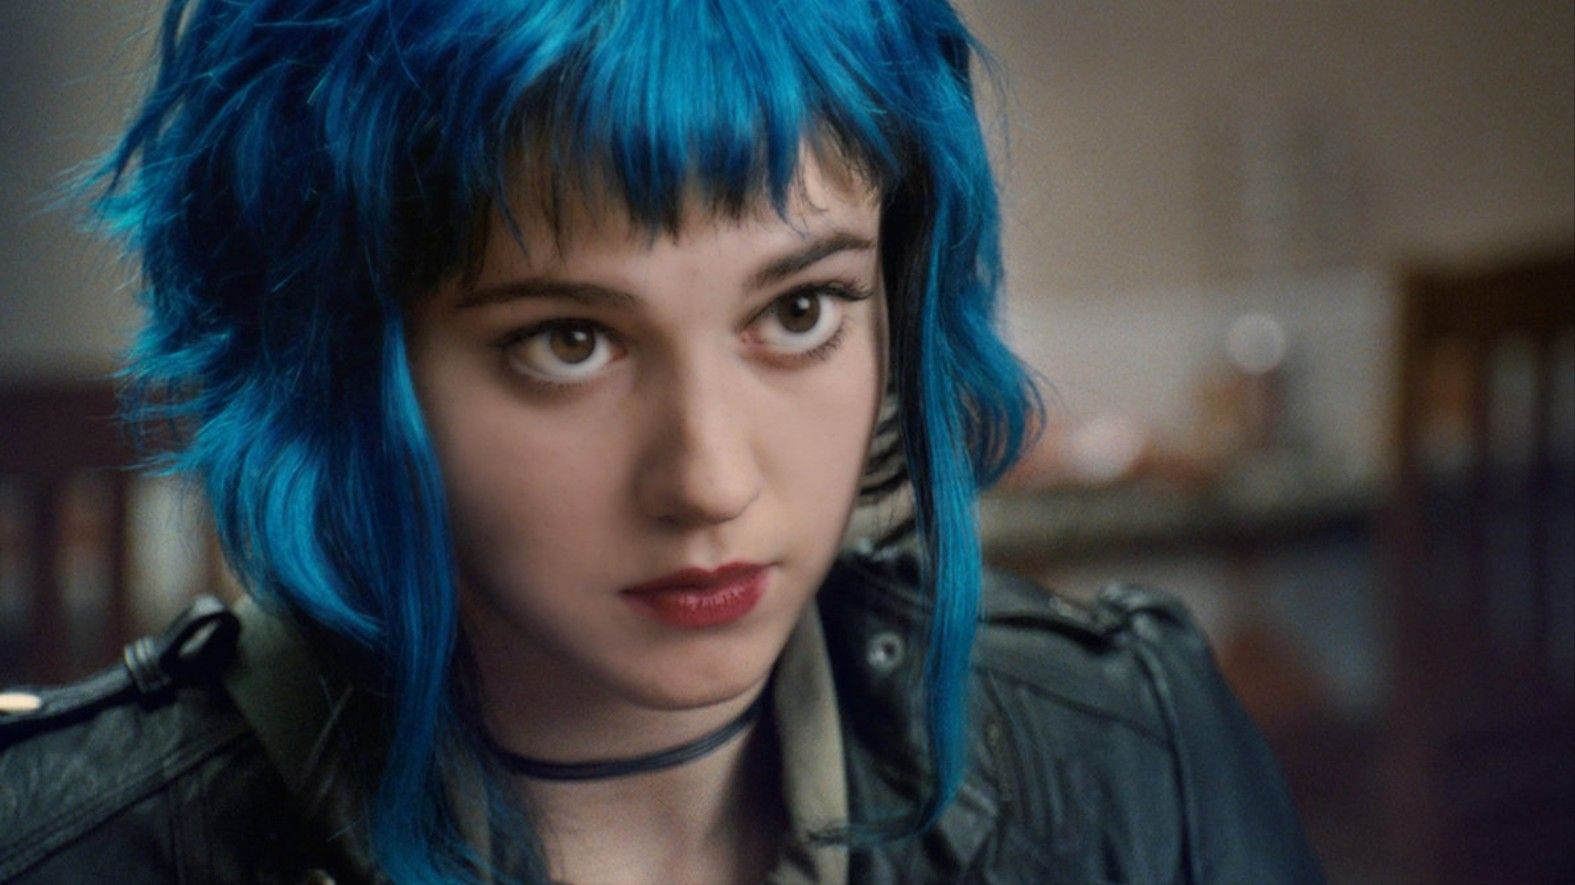 Birds Of Prey Star Mary Elizabeth Winstead On What A Scott Pilgrim Sequel Could Be